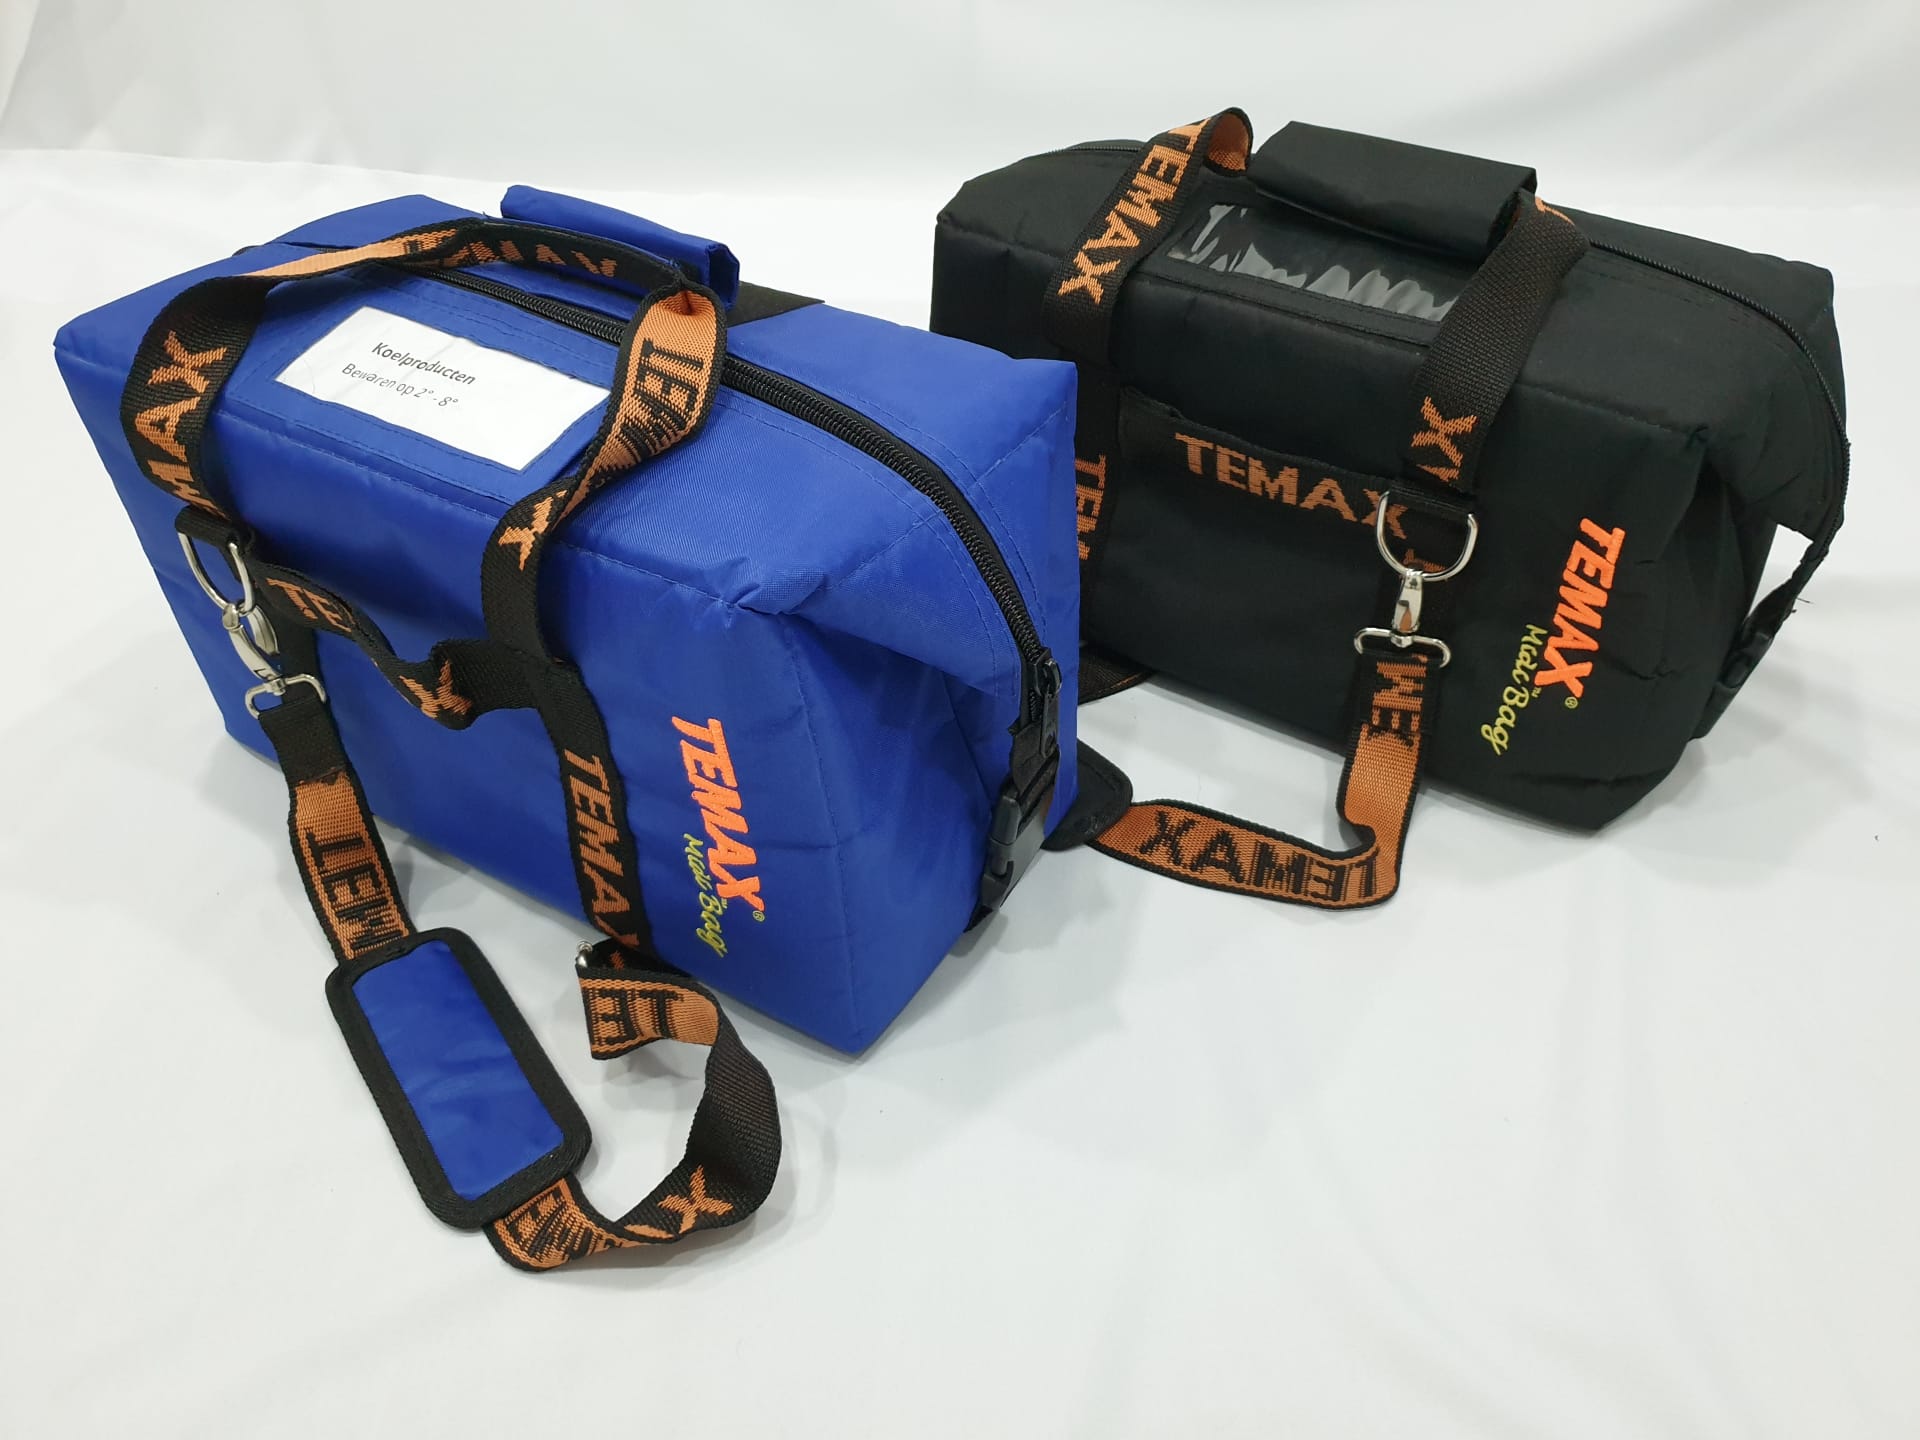 Cooler bag, insulated carrying bag for medicines and healthcare products